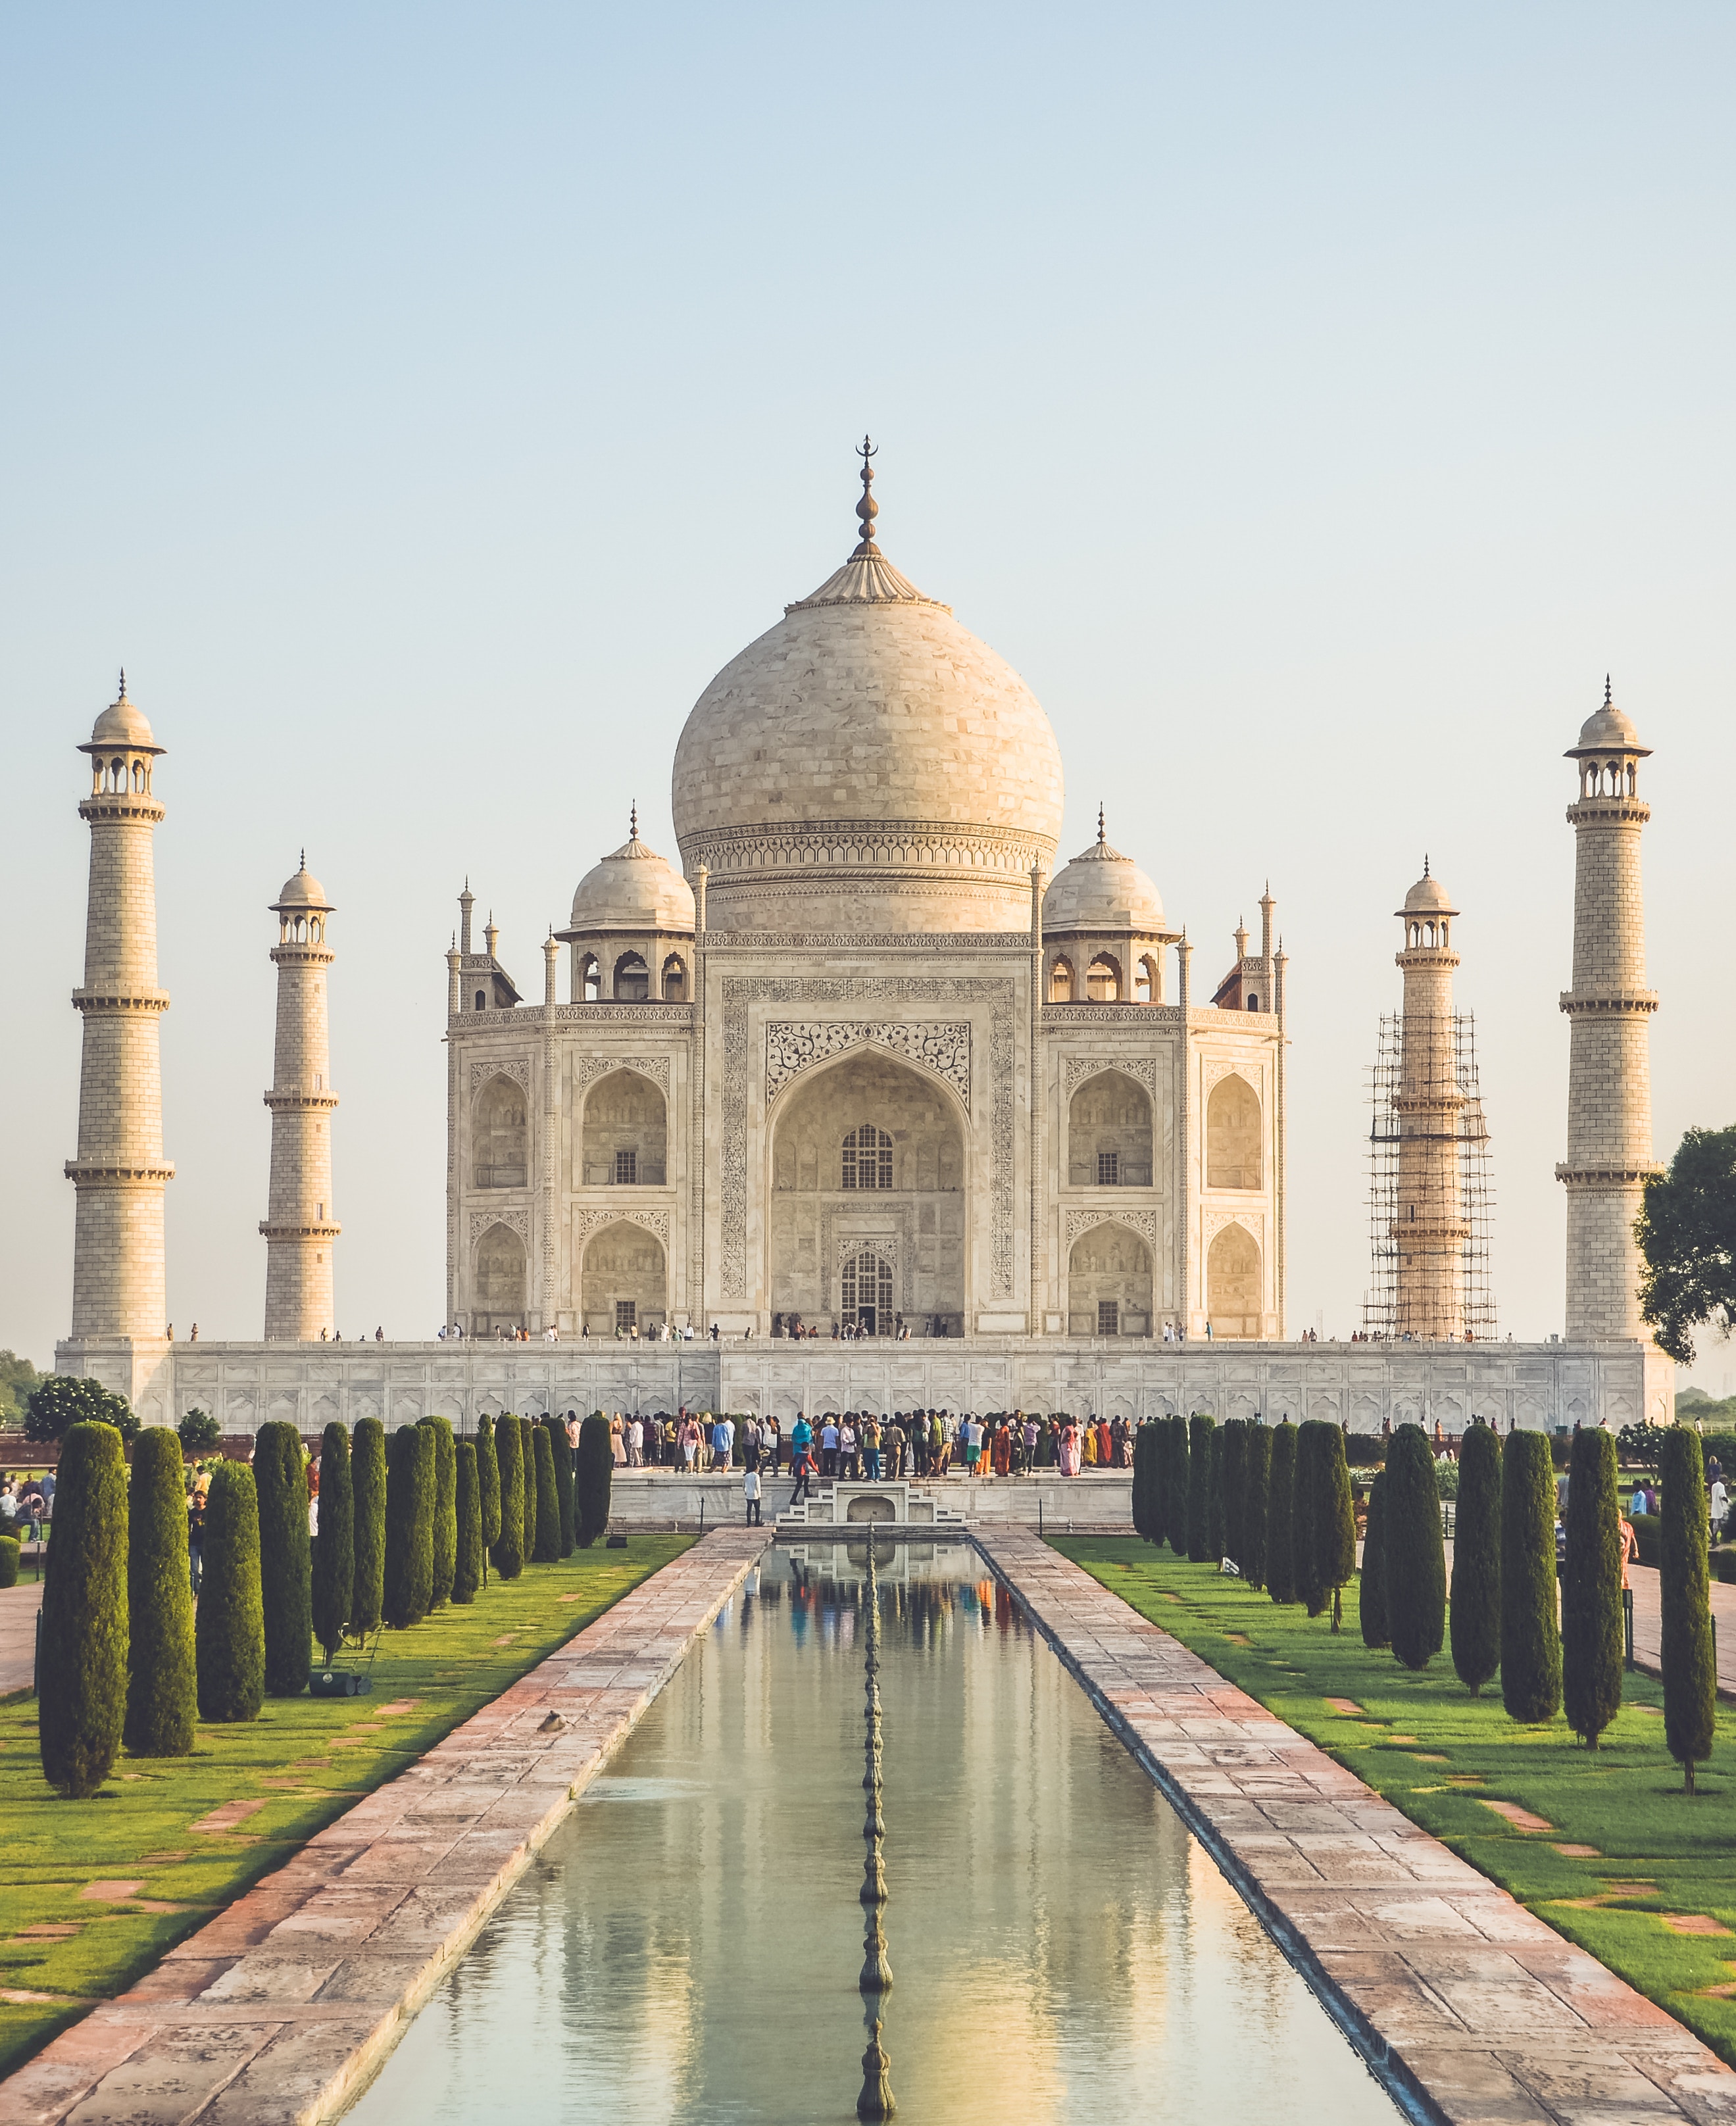 The Taj Mahal can tell us a lot about a mausoleum meaning